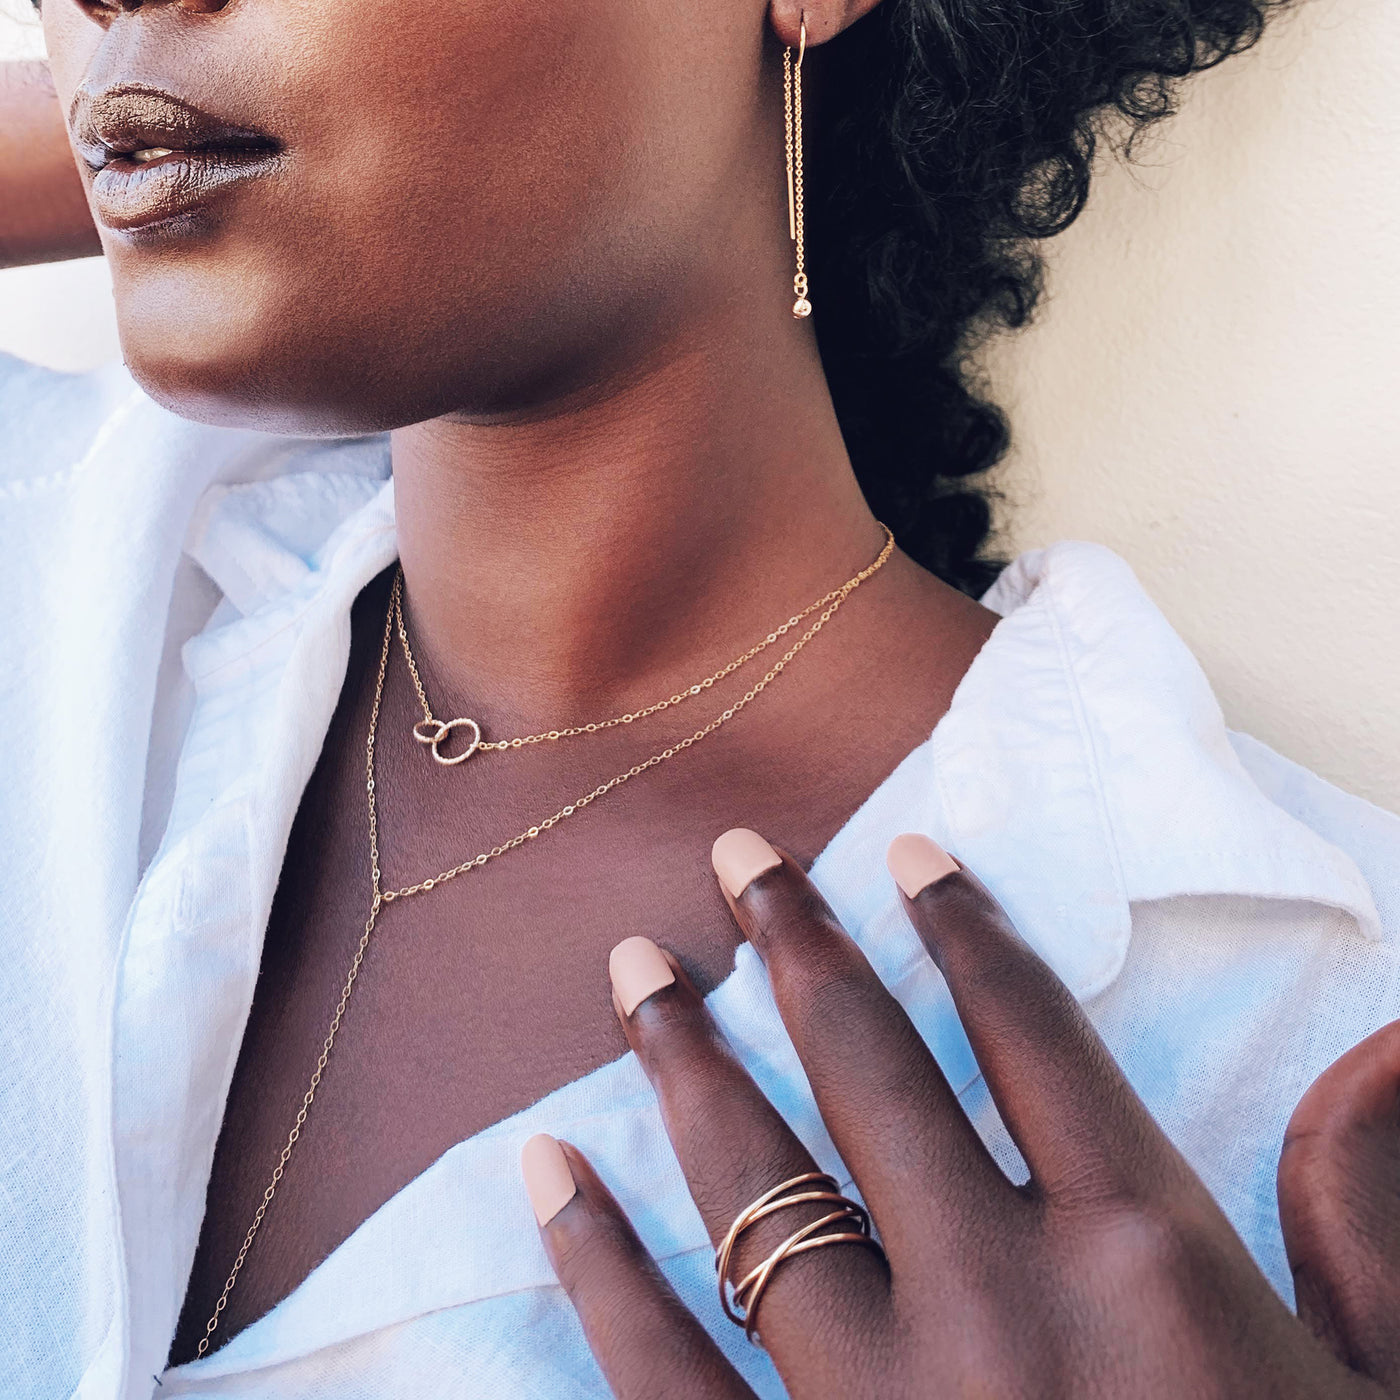 Ring on a Necklace: What Does it Mean? – LaCkore Couture